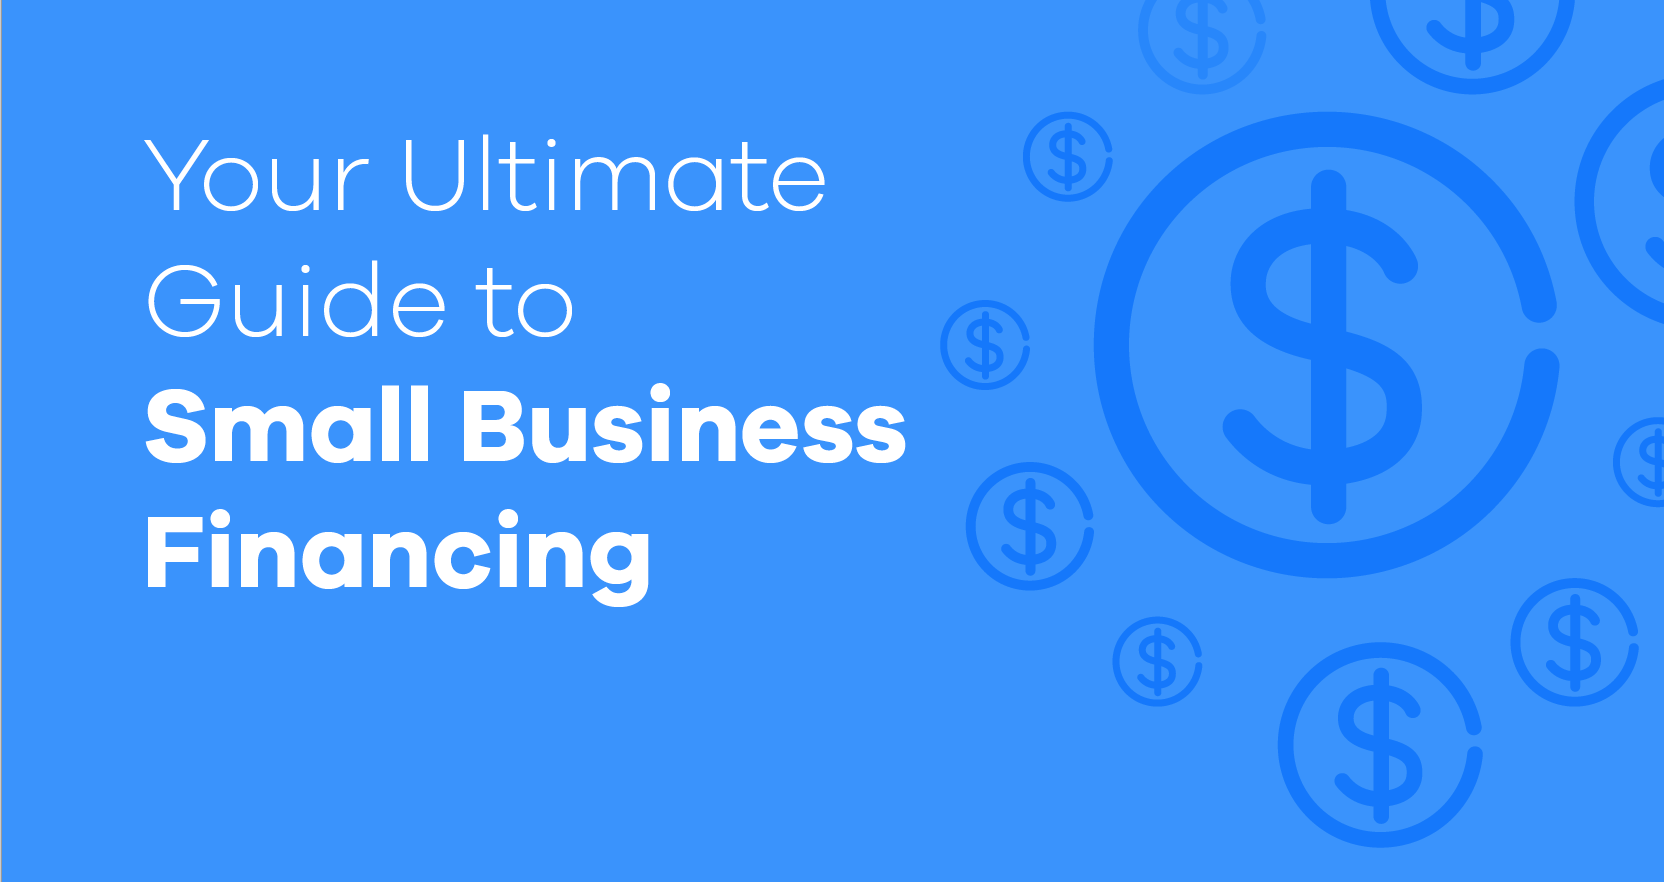 Guide to Small Business Financing